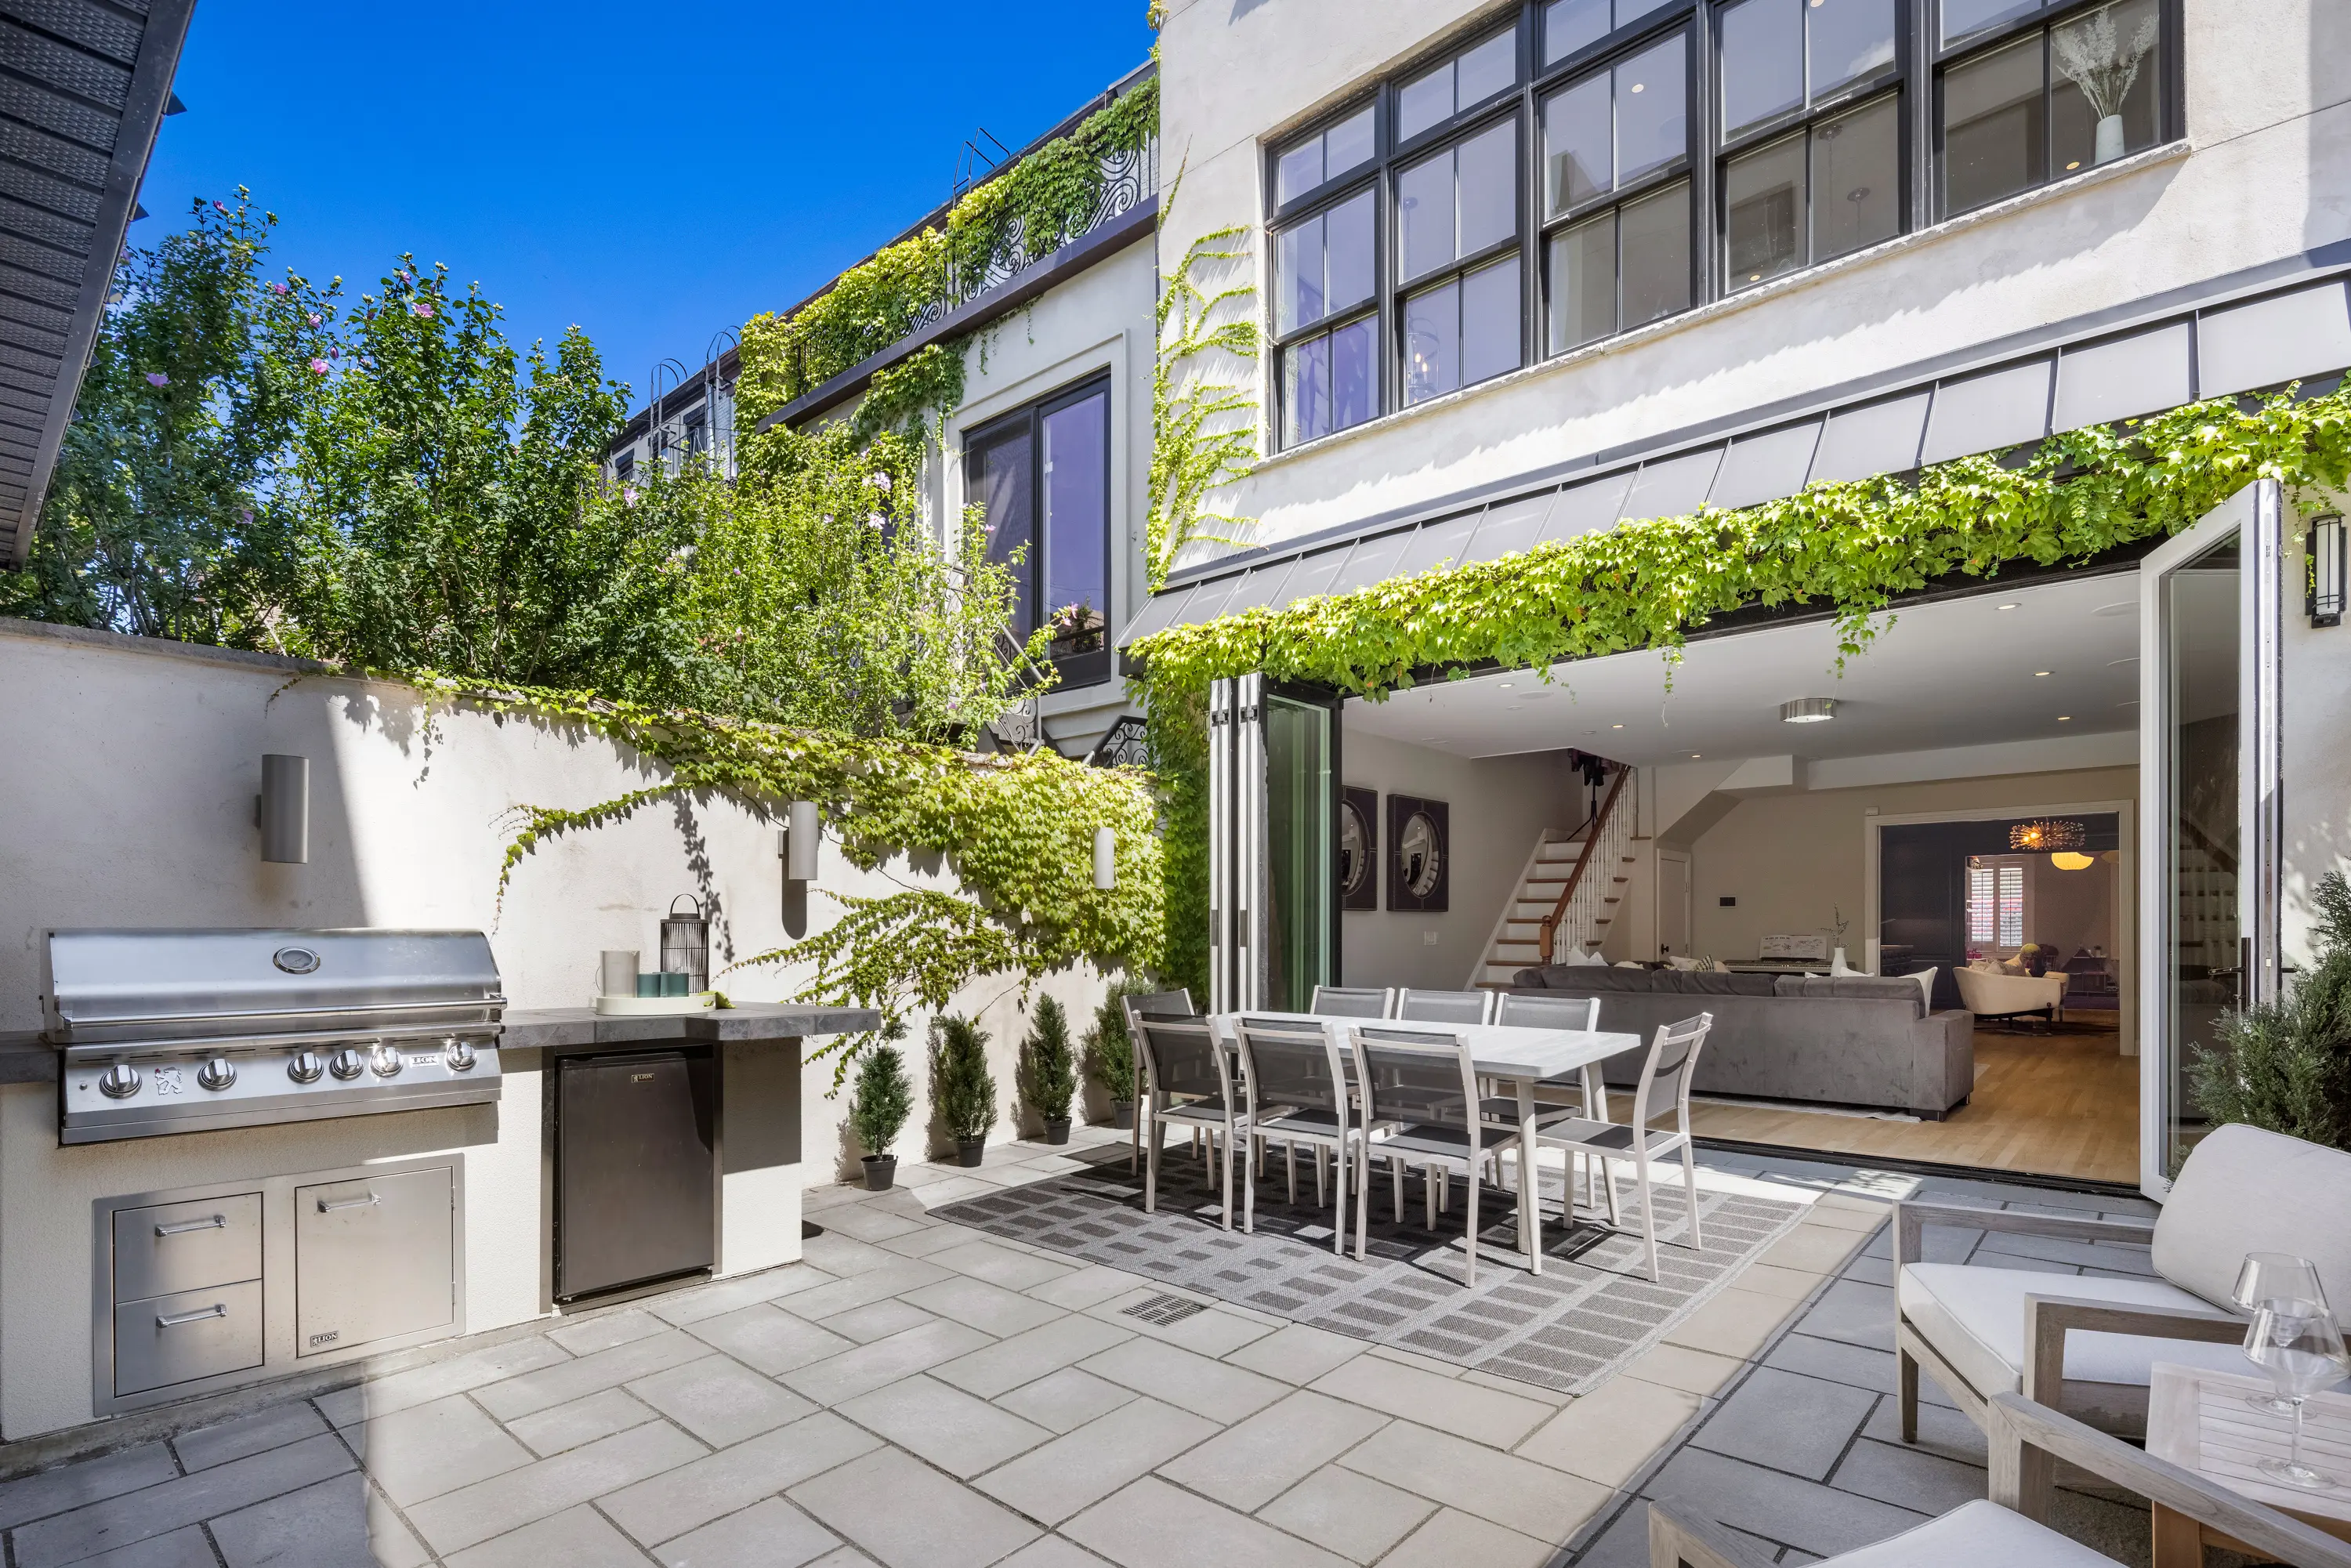 Complete with a garage and carriage house, $6.9M Hoboken townhouse ...